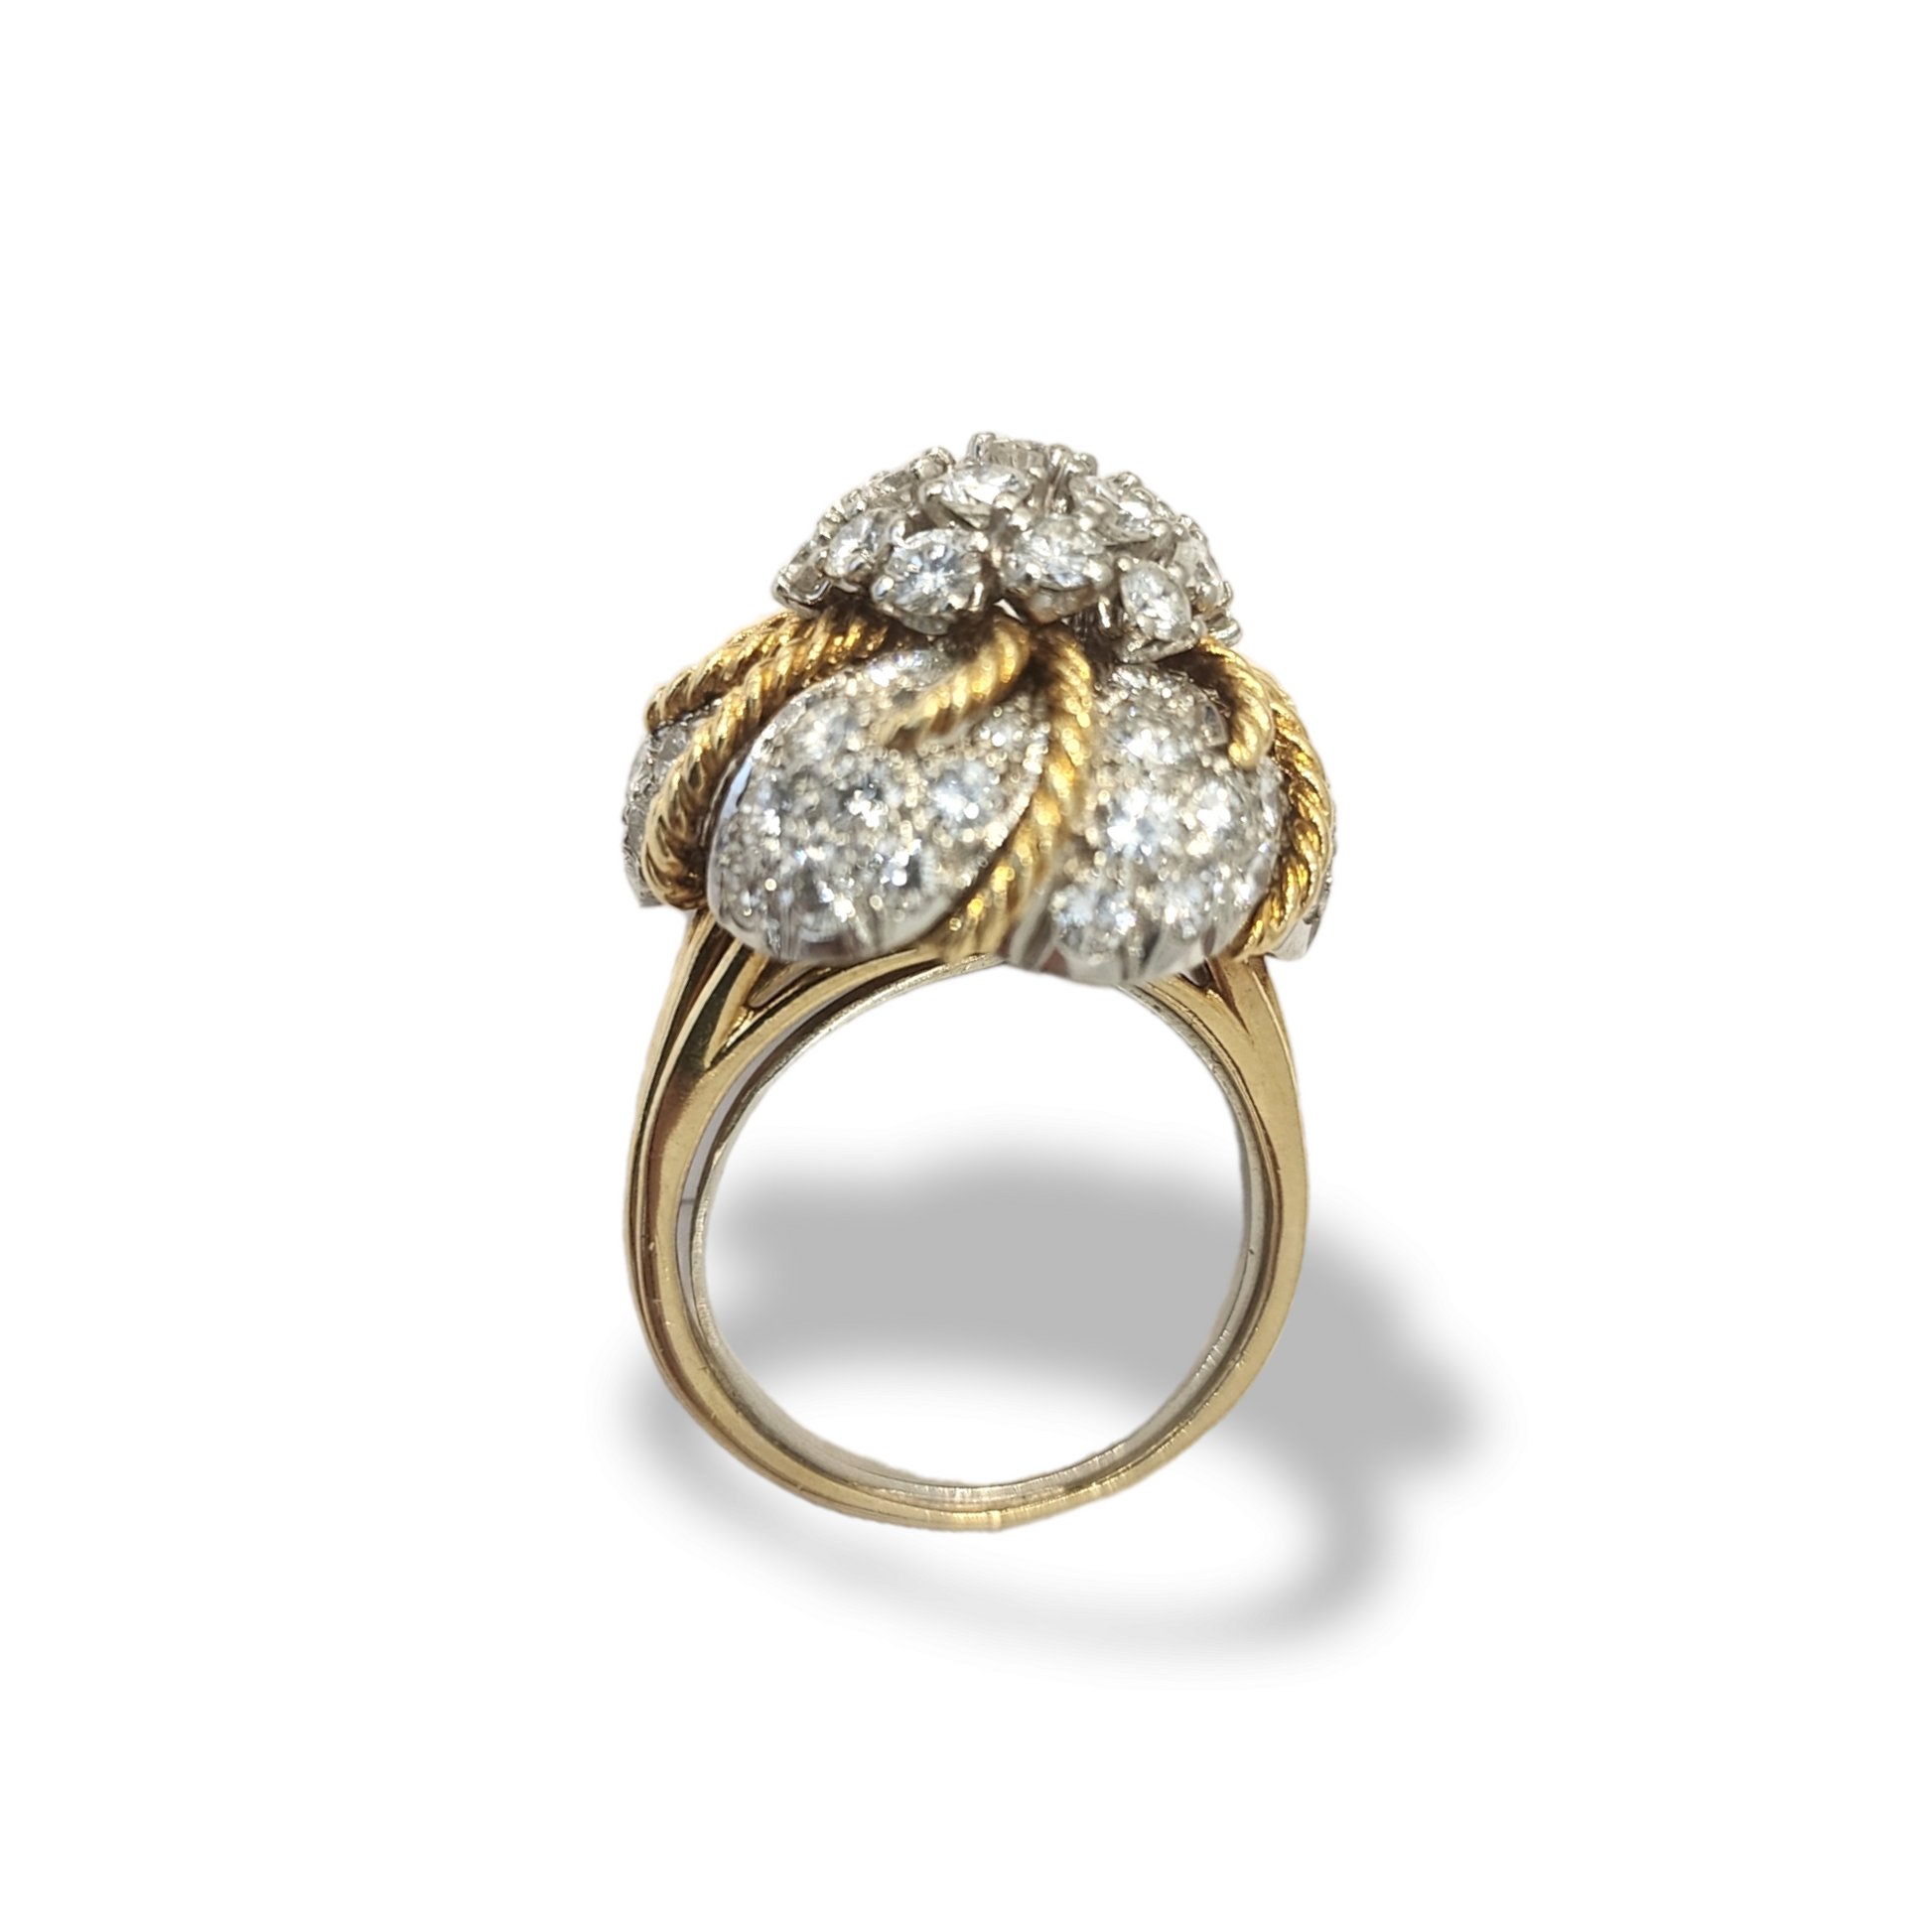 1960s 18KT Yellow Gold Diamond Domed Ring profile view